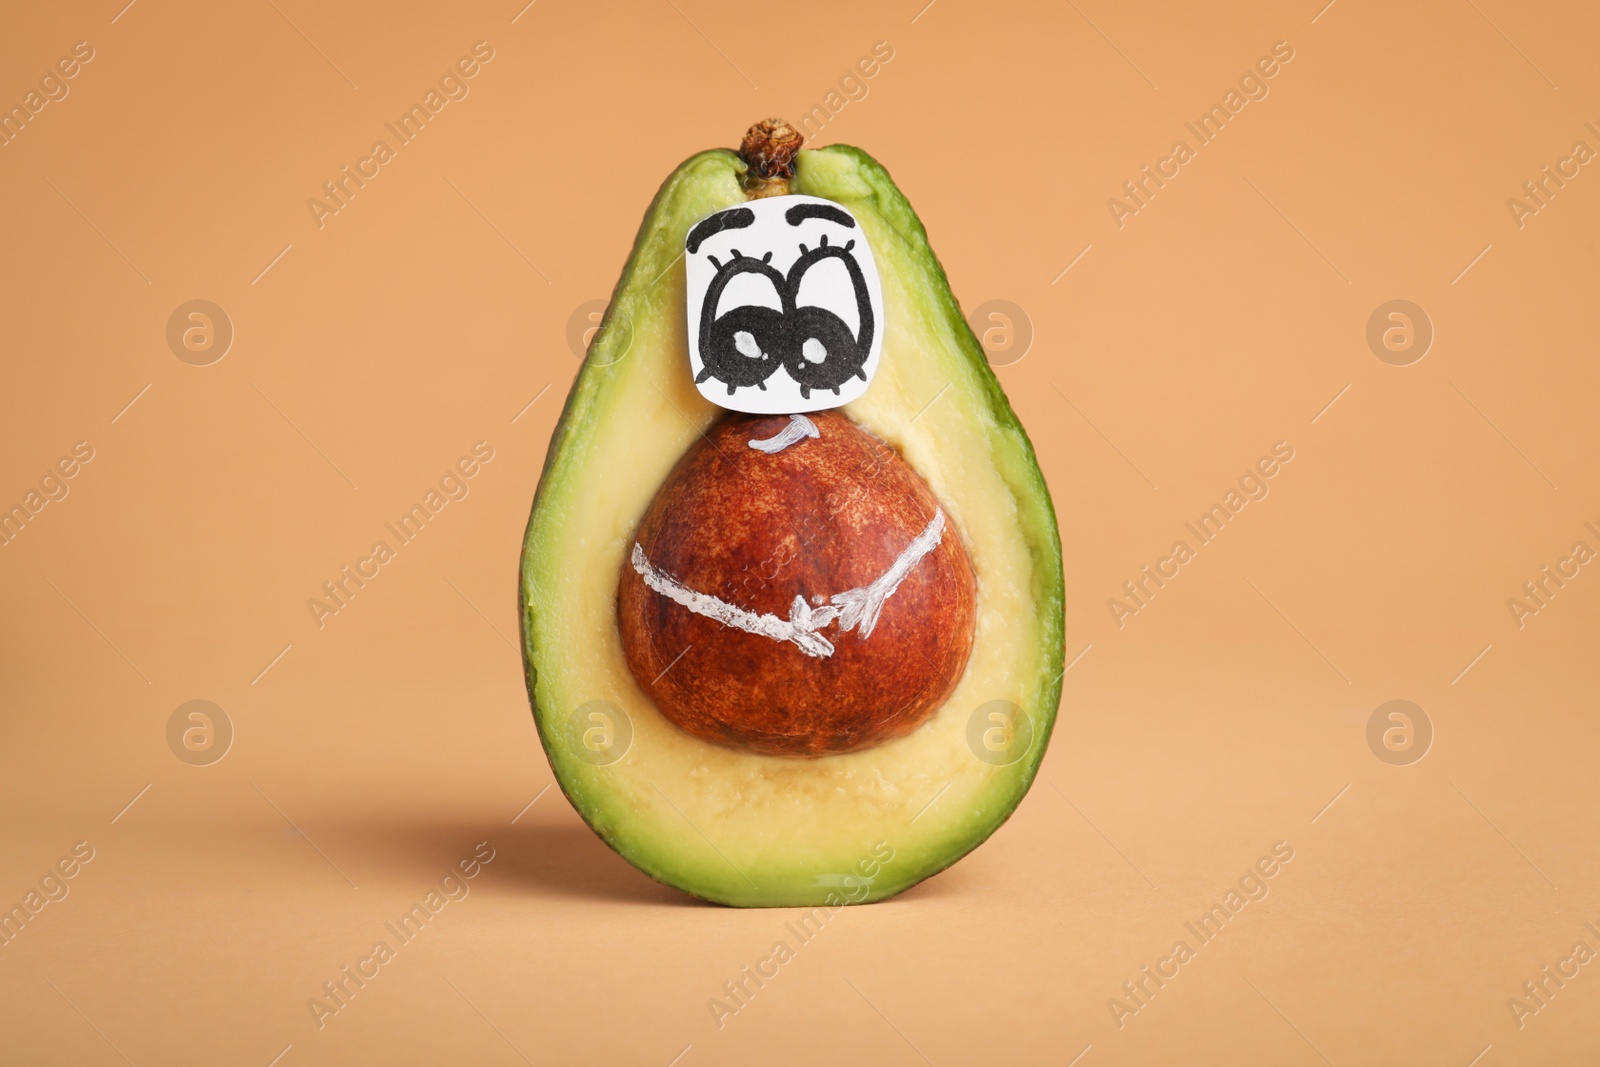 Photo of Avocado with drawn face on orange background. Exhibitionist concept